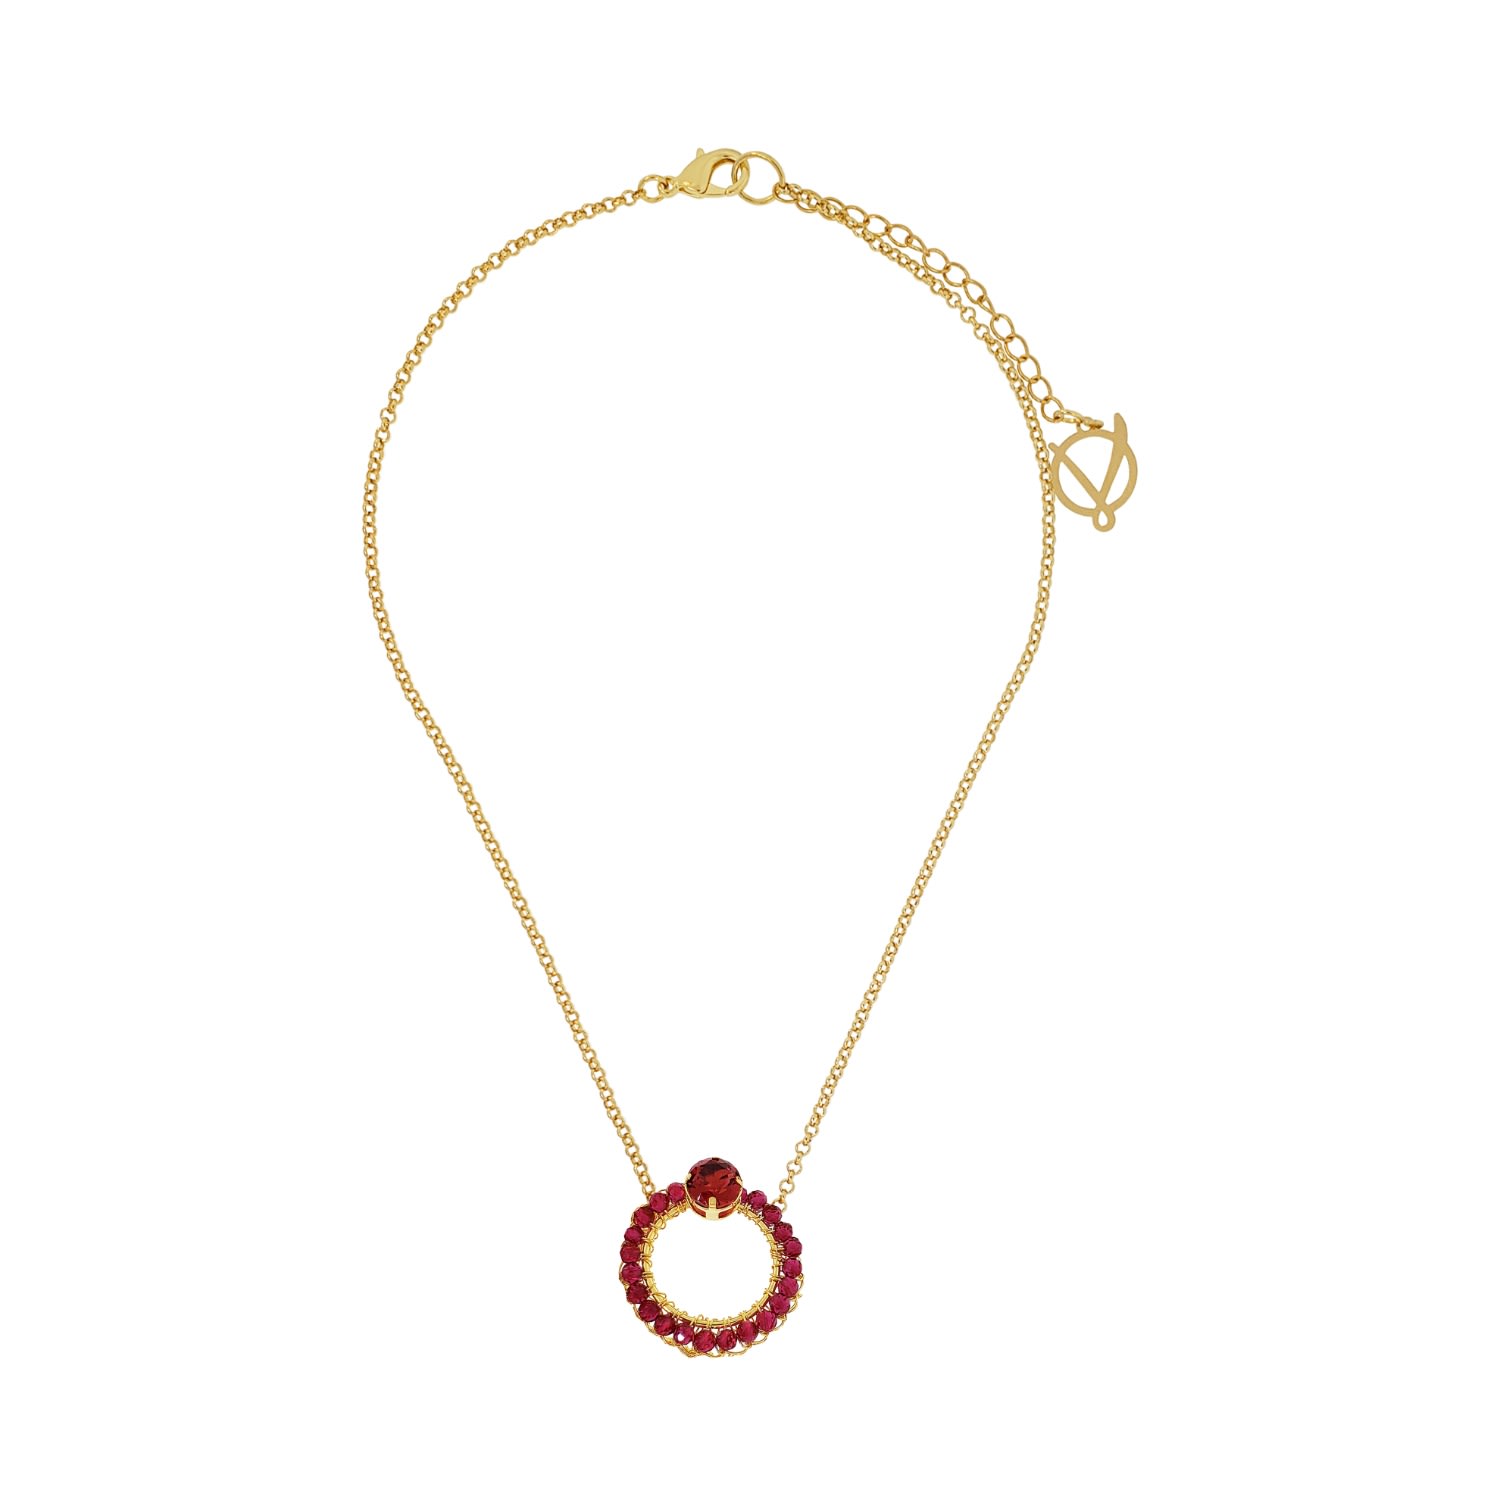 Women’s Gold / Red Ruby Red & Gold Lena Handmade Crochet Necklace Lavish by Tricia Milaneze